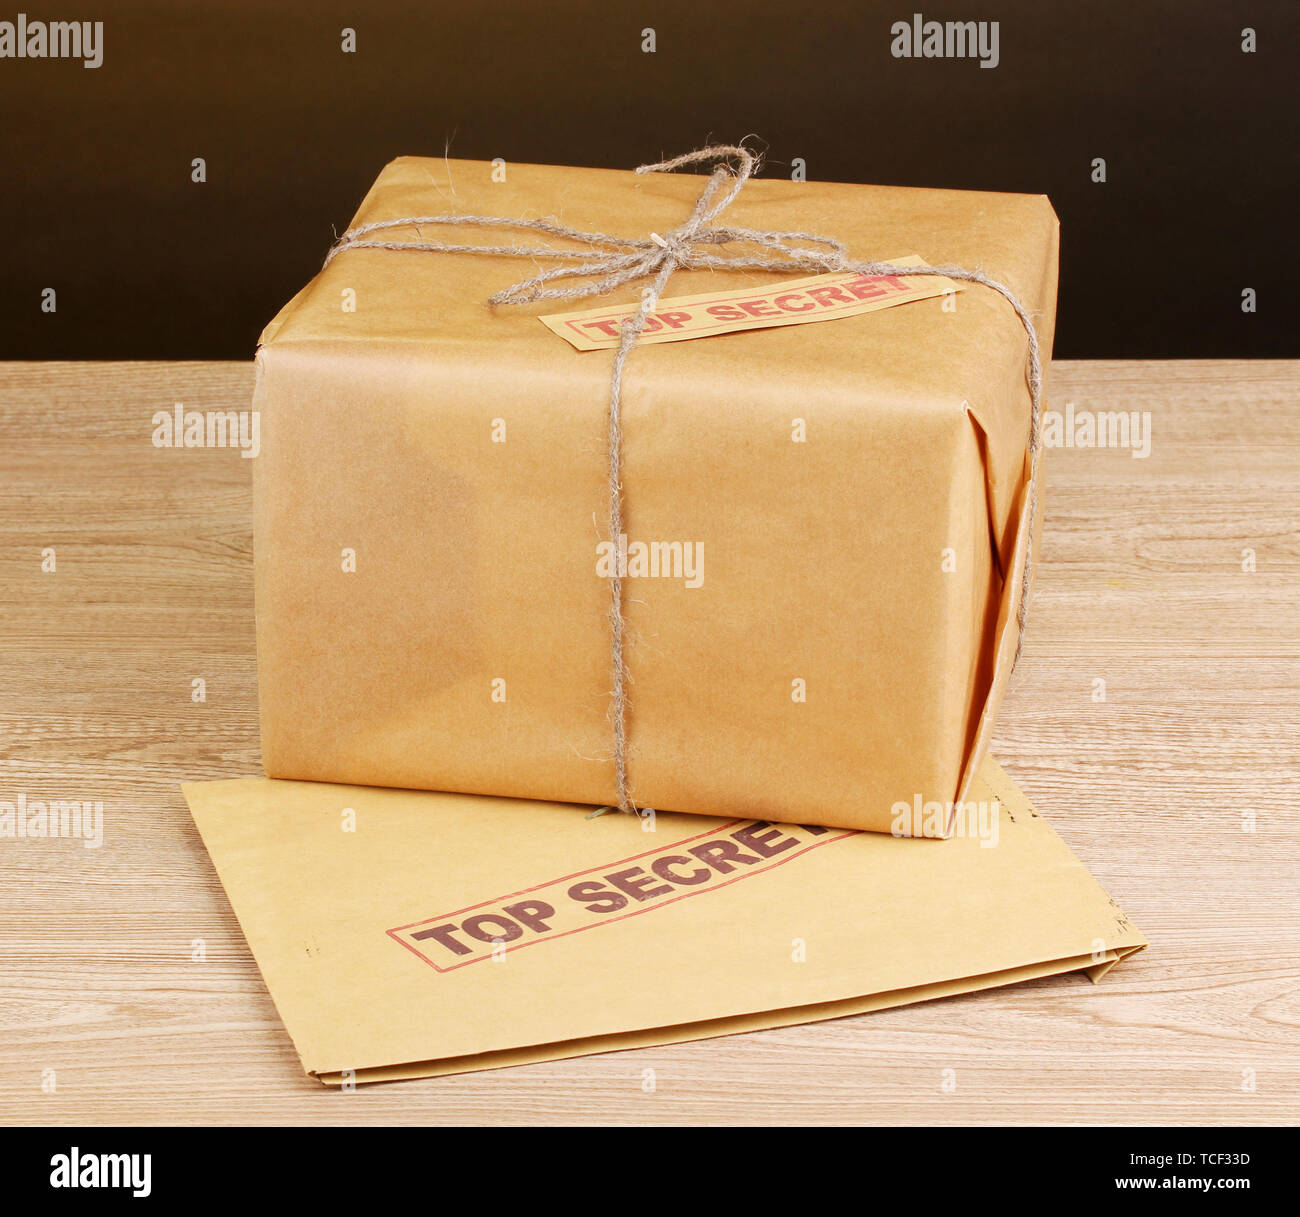 Parcel and envelope with top secret stamp on wooden table on brown background Stock Photo